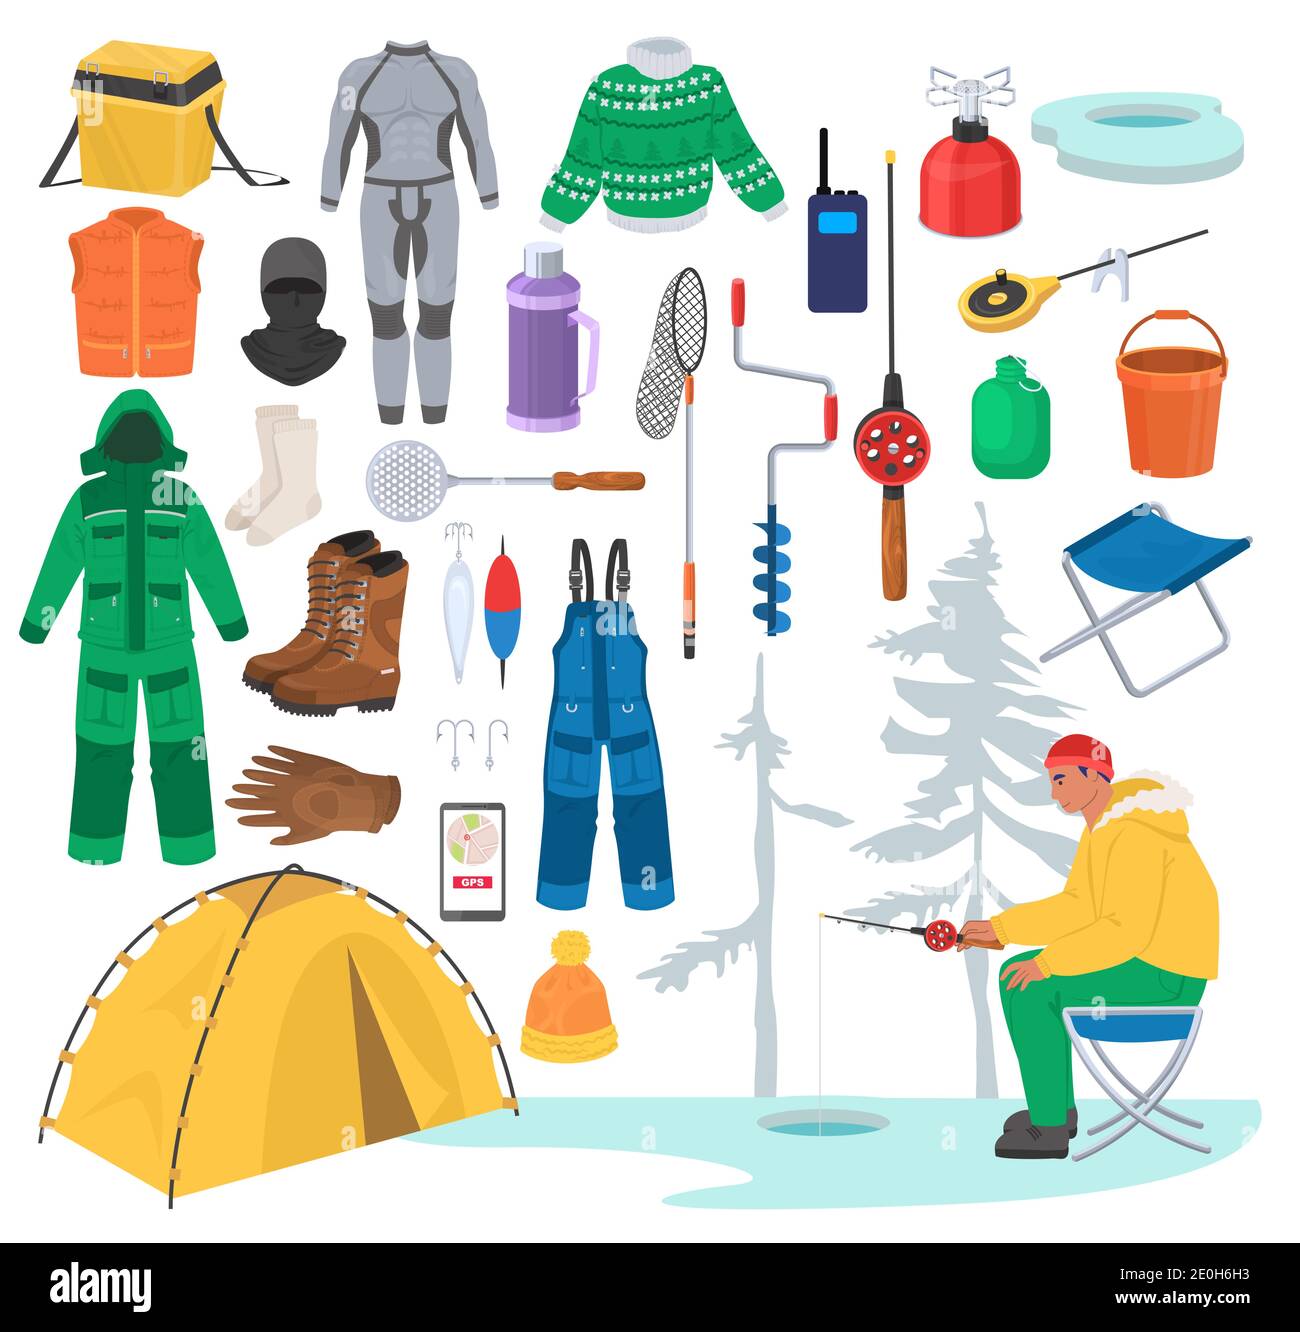 https://c8.alamy.com/comp/2E0H6H3/ice-fishing-gear-equipment-for-winter-fishing-flat-vector-illustration-warm-clothes-fisherman-tackle-and-accessories-2E0H6H3.jpg